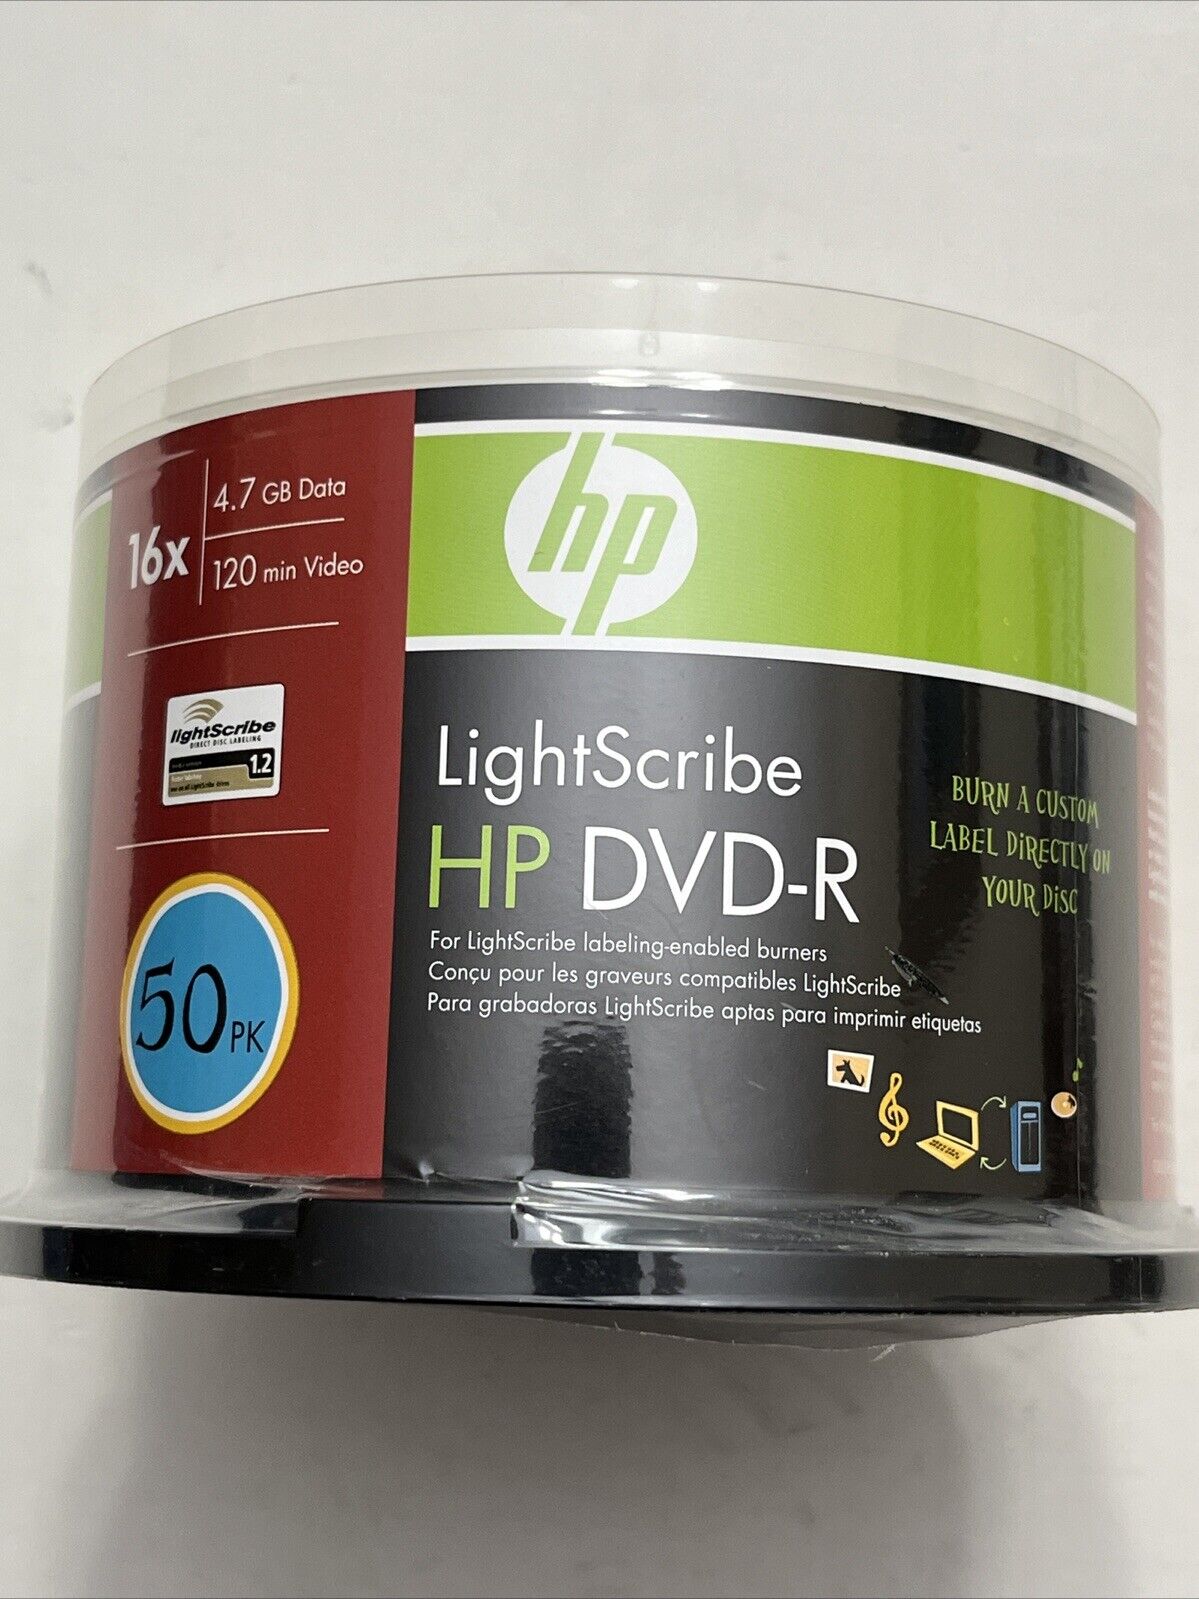 HP Lightscribe DVDs - DVD-R - 16x - New - Package of 50 - Sealed - 4.7gb